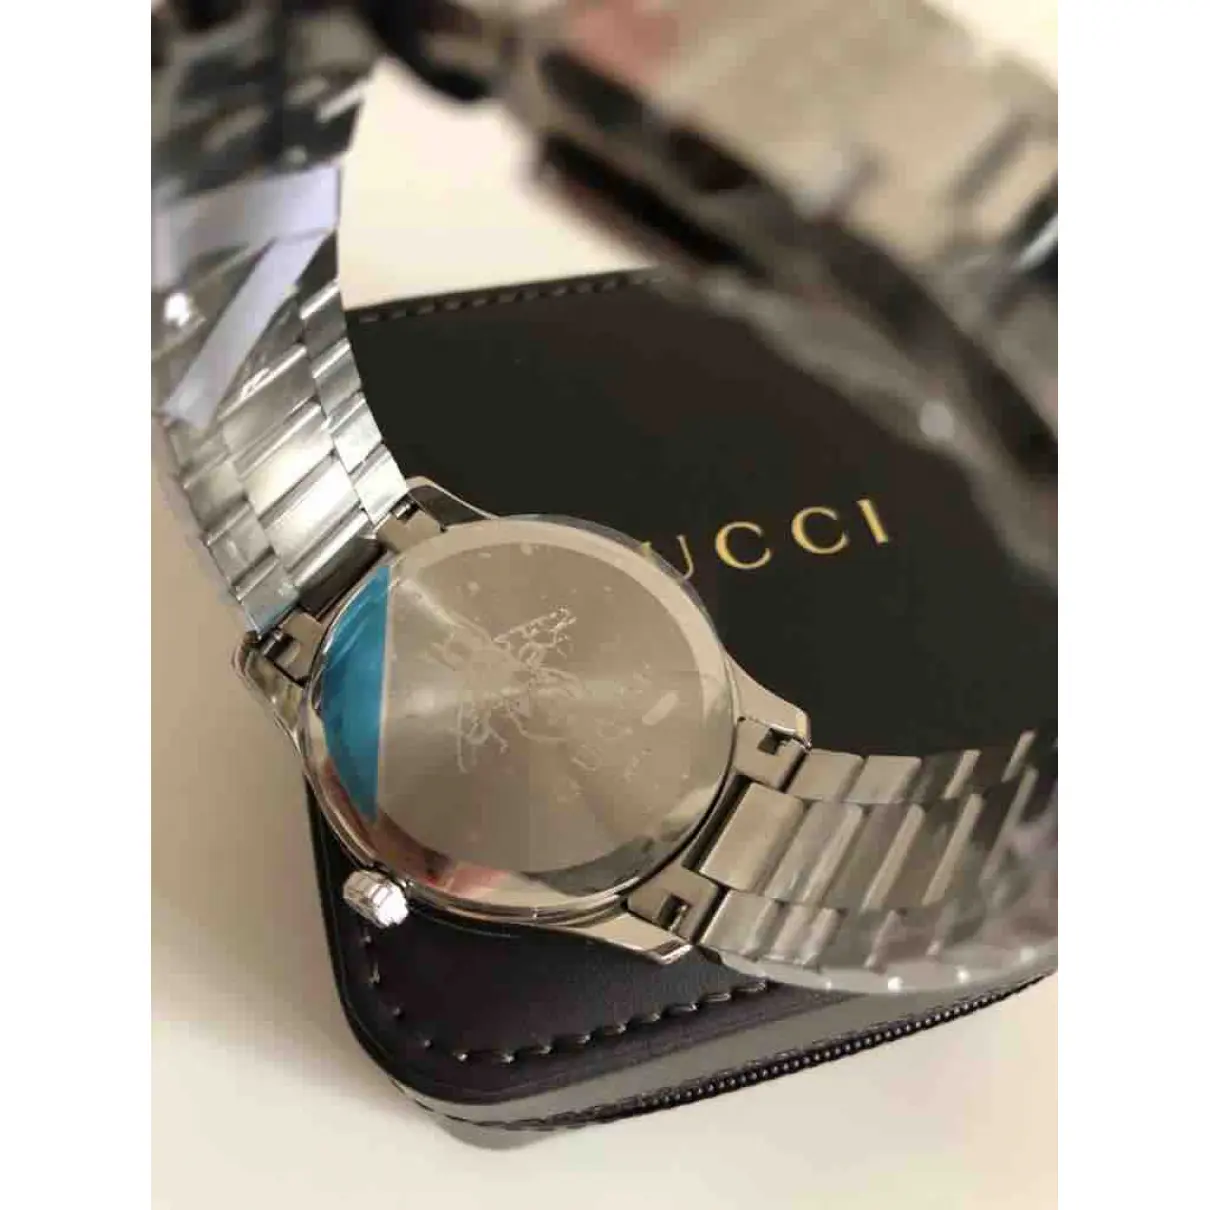 Buy Gucci G-Timeless watch online